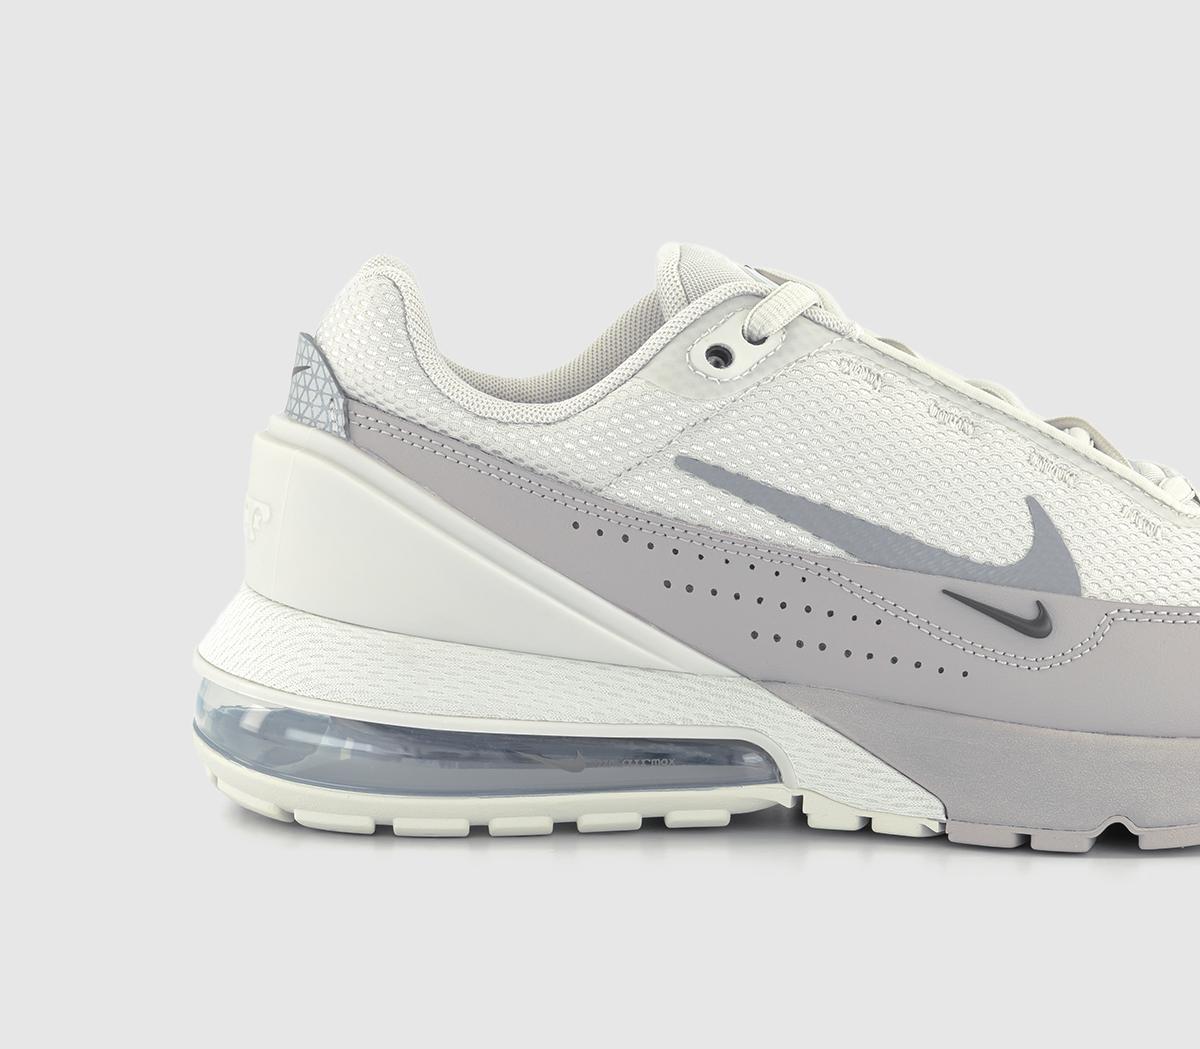 Nike Nike Air Max Pulse Trainers Light Bone Particle Grey College Grey ...